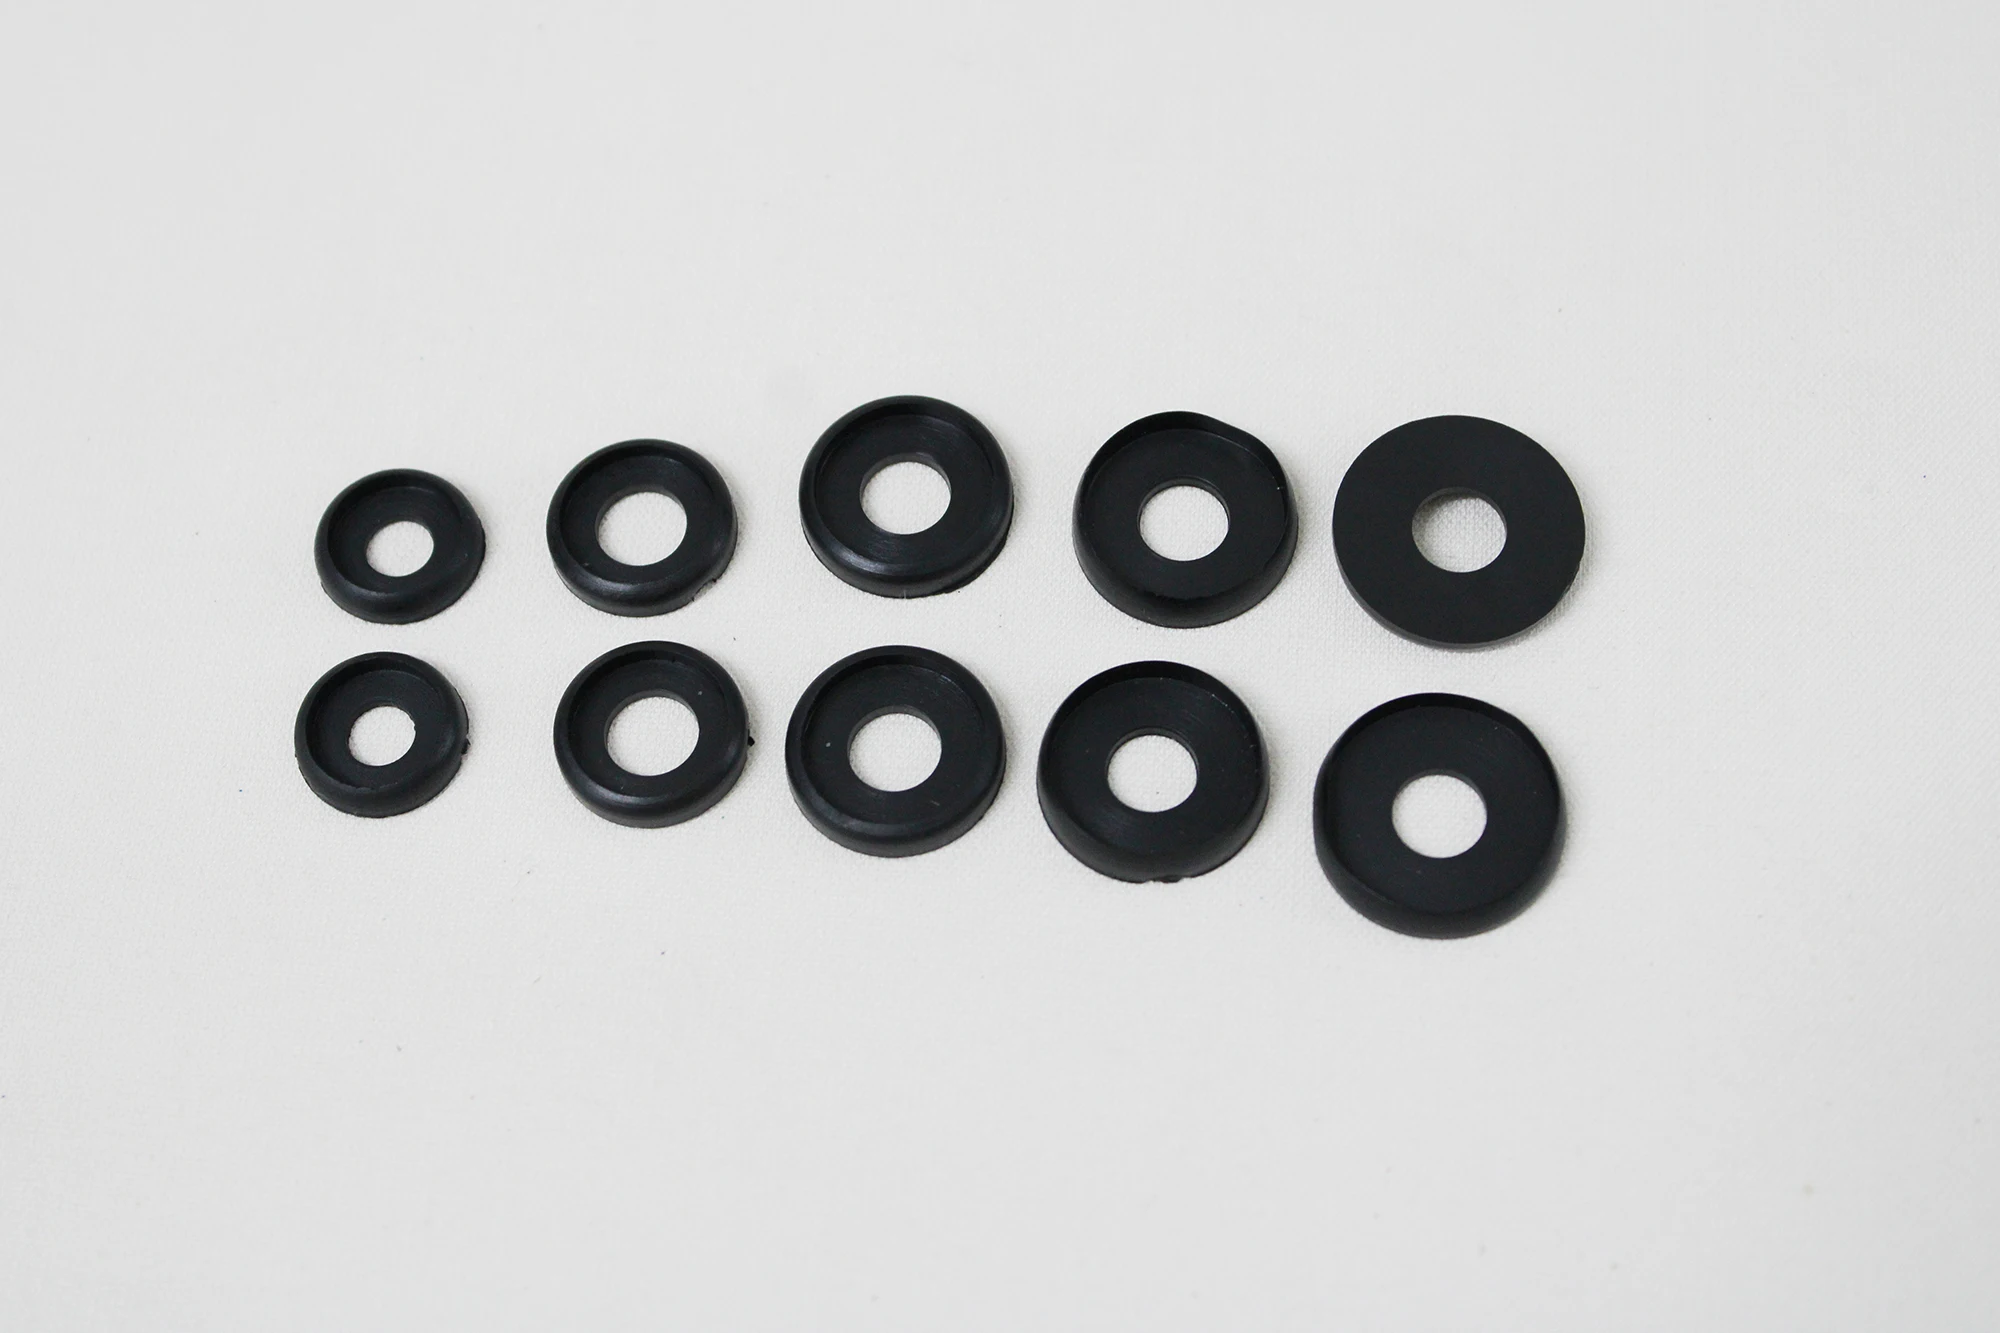 

50pcs 10mm 12mm 14mm 16mm 18mm 20mm black round toy eyelid for toy eyes accessories-size option